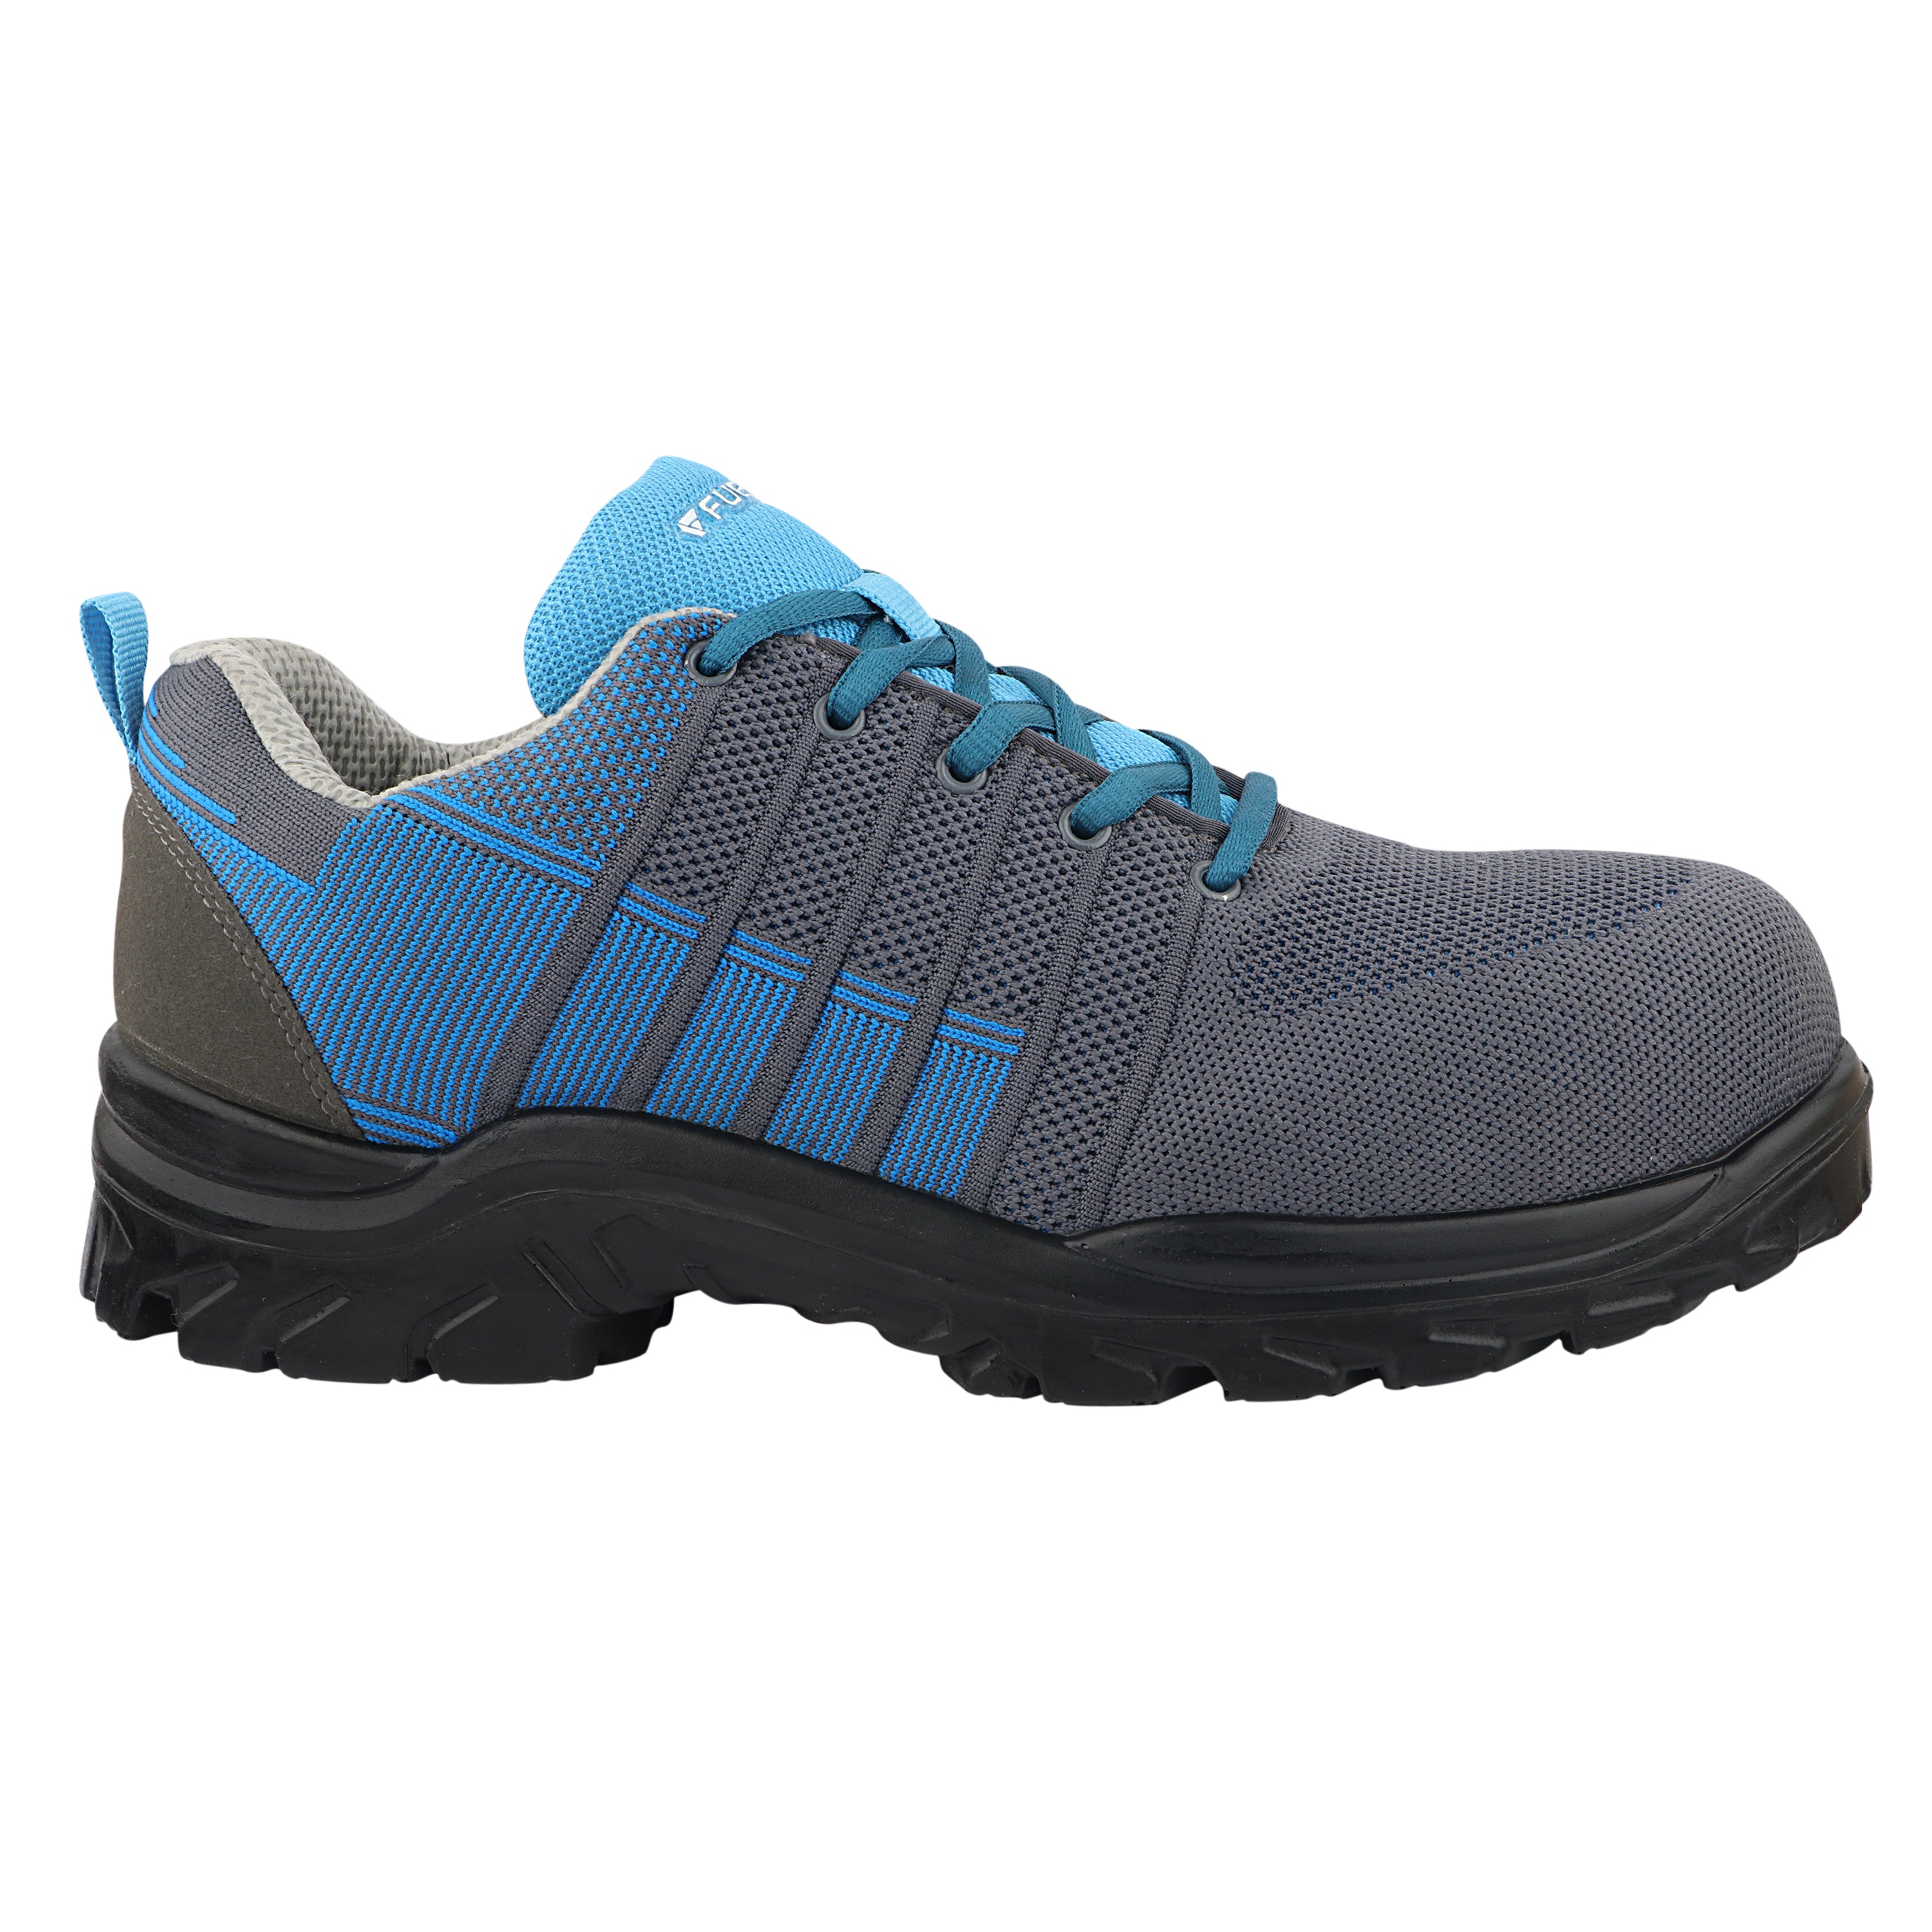 Fuel Aqua Sporty Design Knitted Fabric Breathable Mesh Lining Safety Shoes For Men's Steel Toe Cap With Single Density PU Sole (Blue)